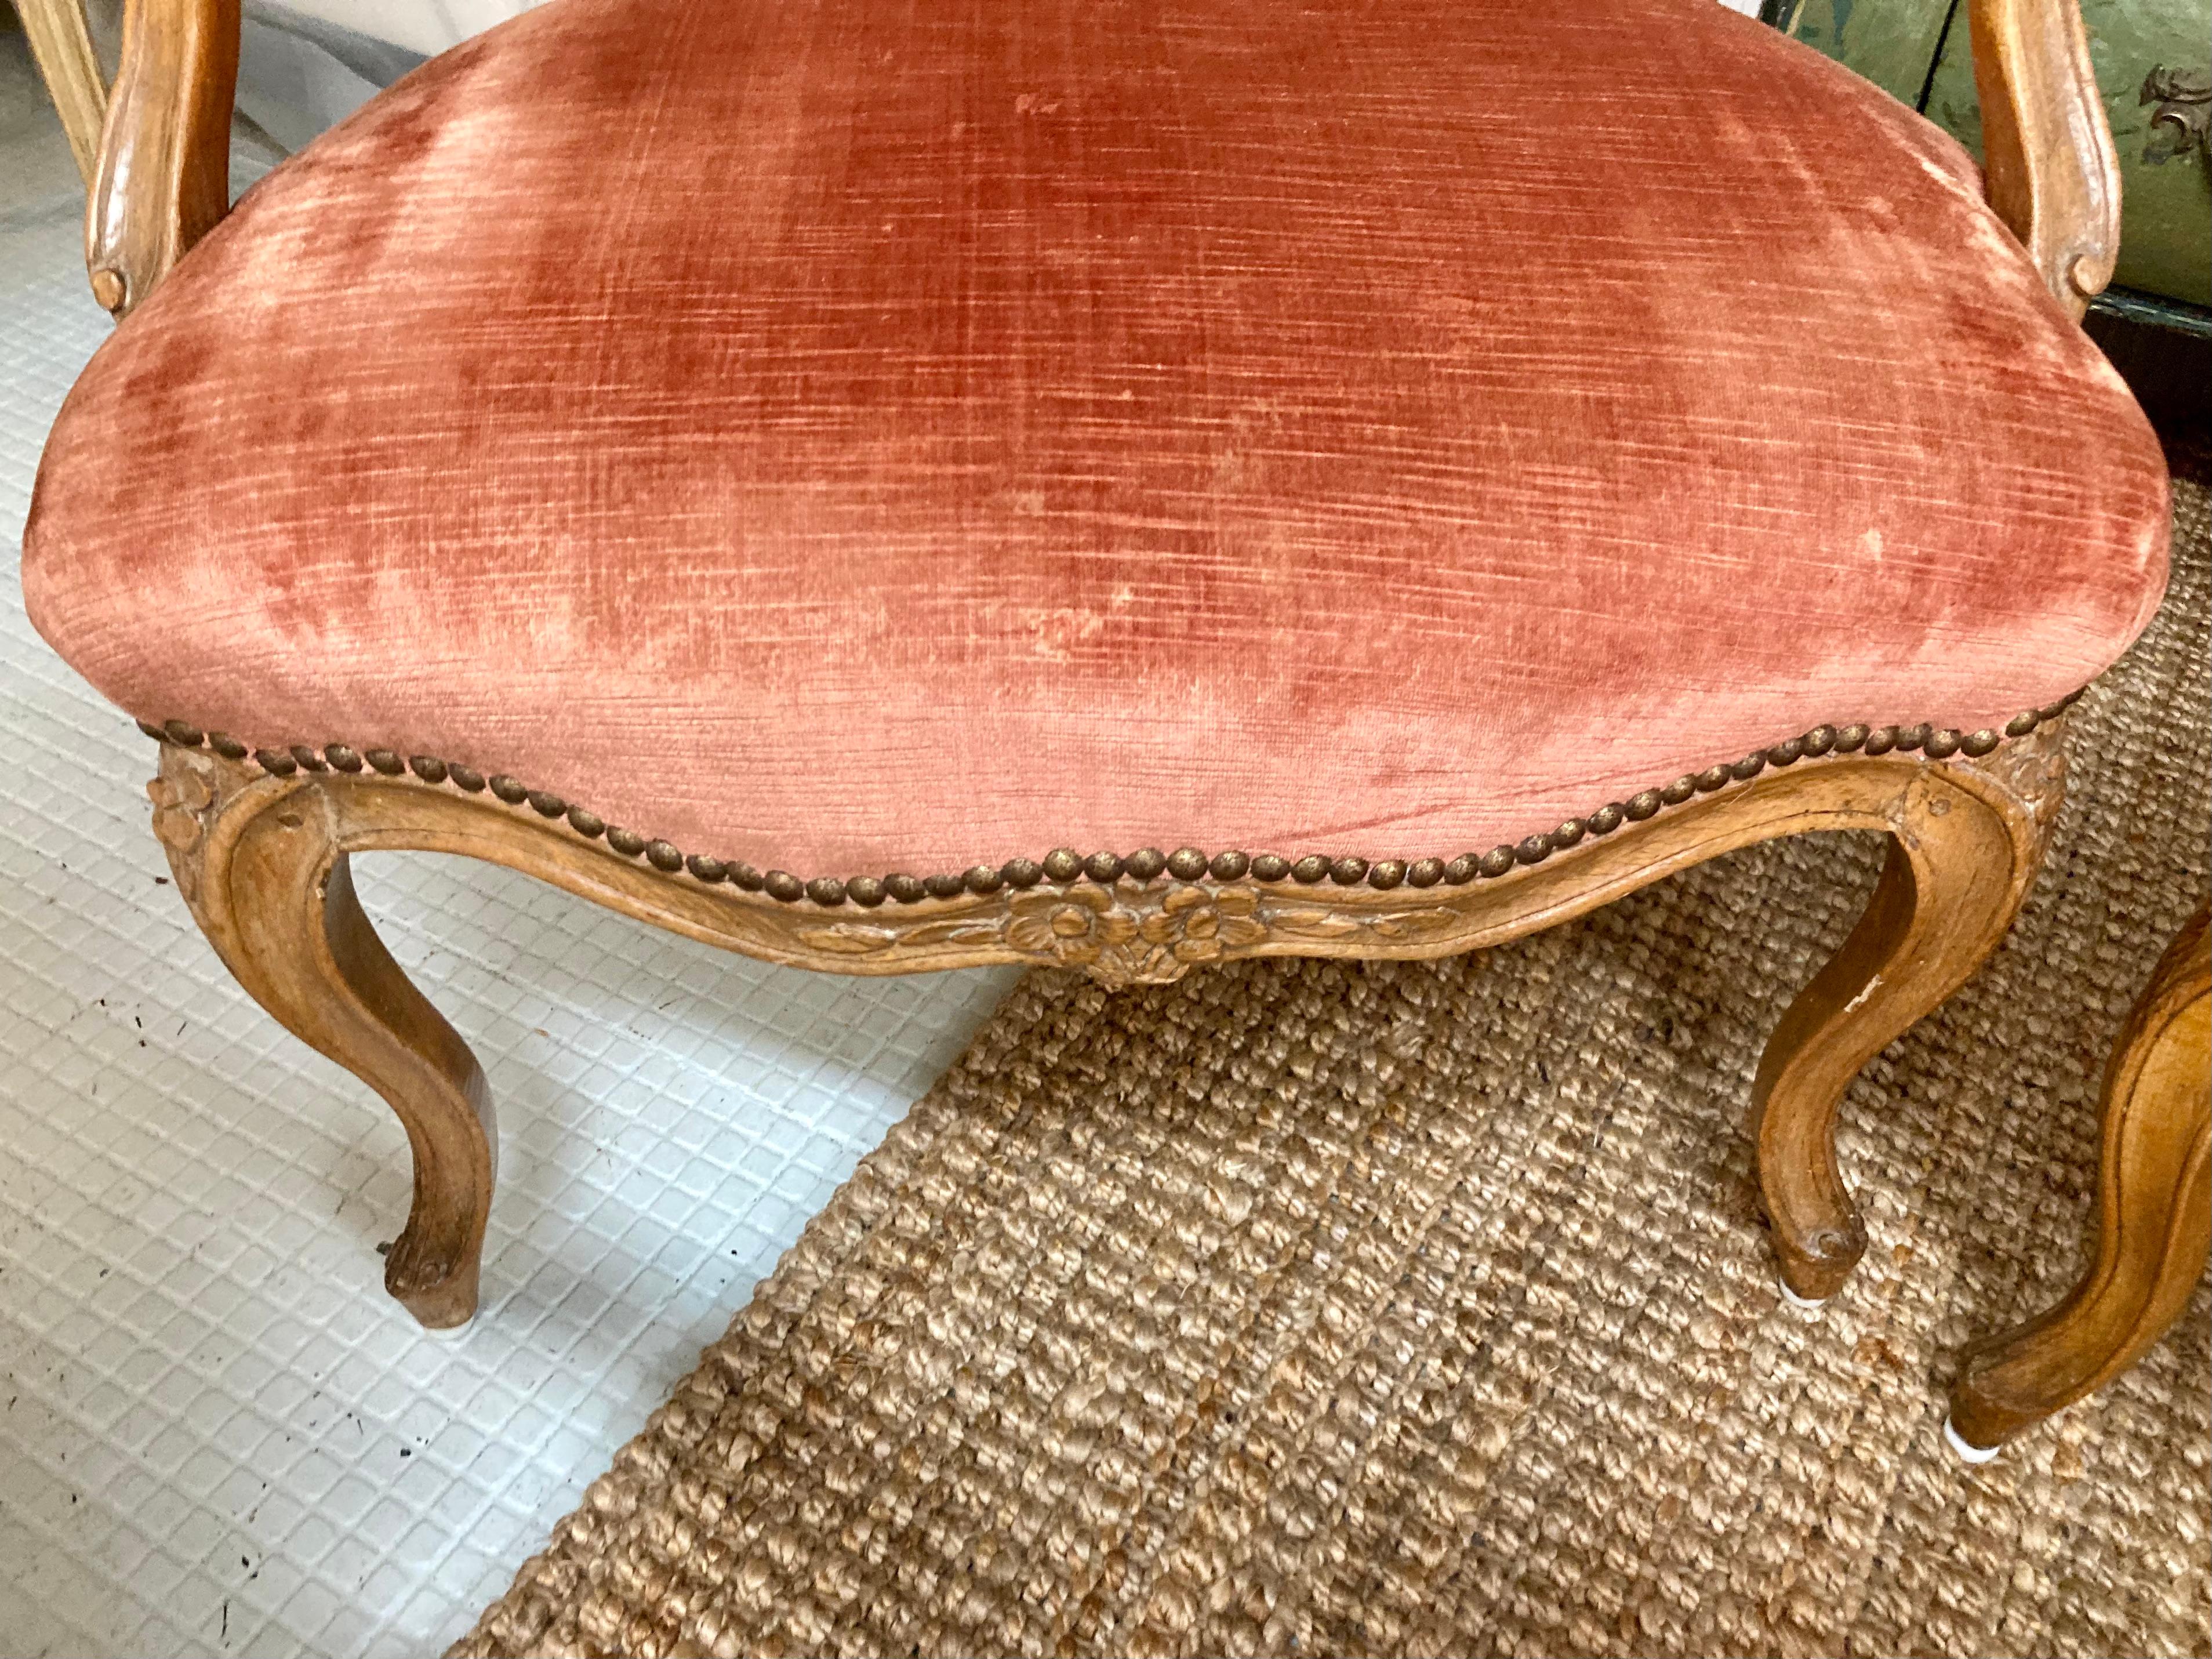 18th C French Louis XV Fauteuil Chairs Each With Unique Carvings - Set of 4 For Sale 5